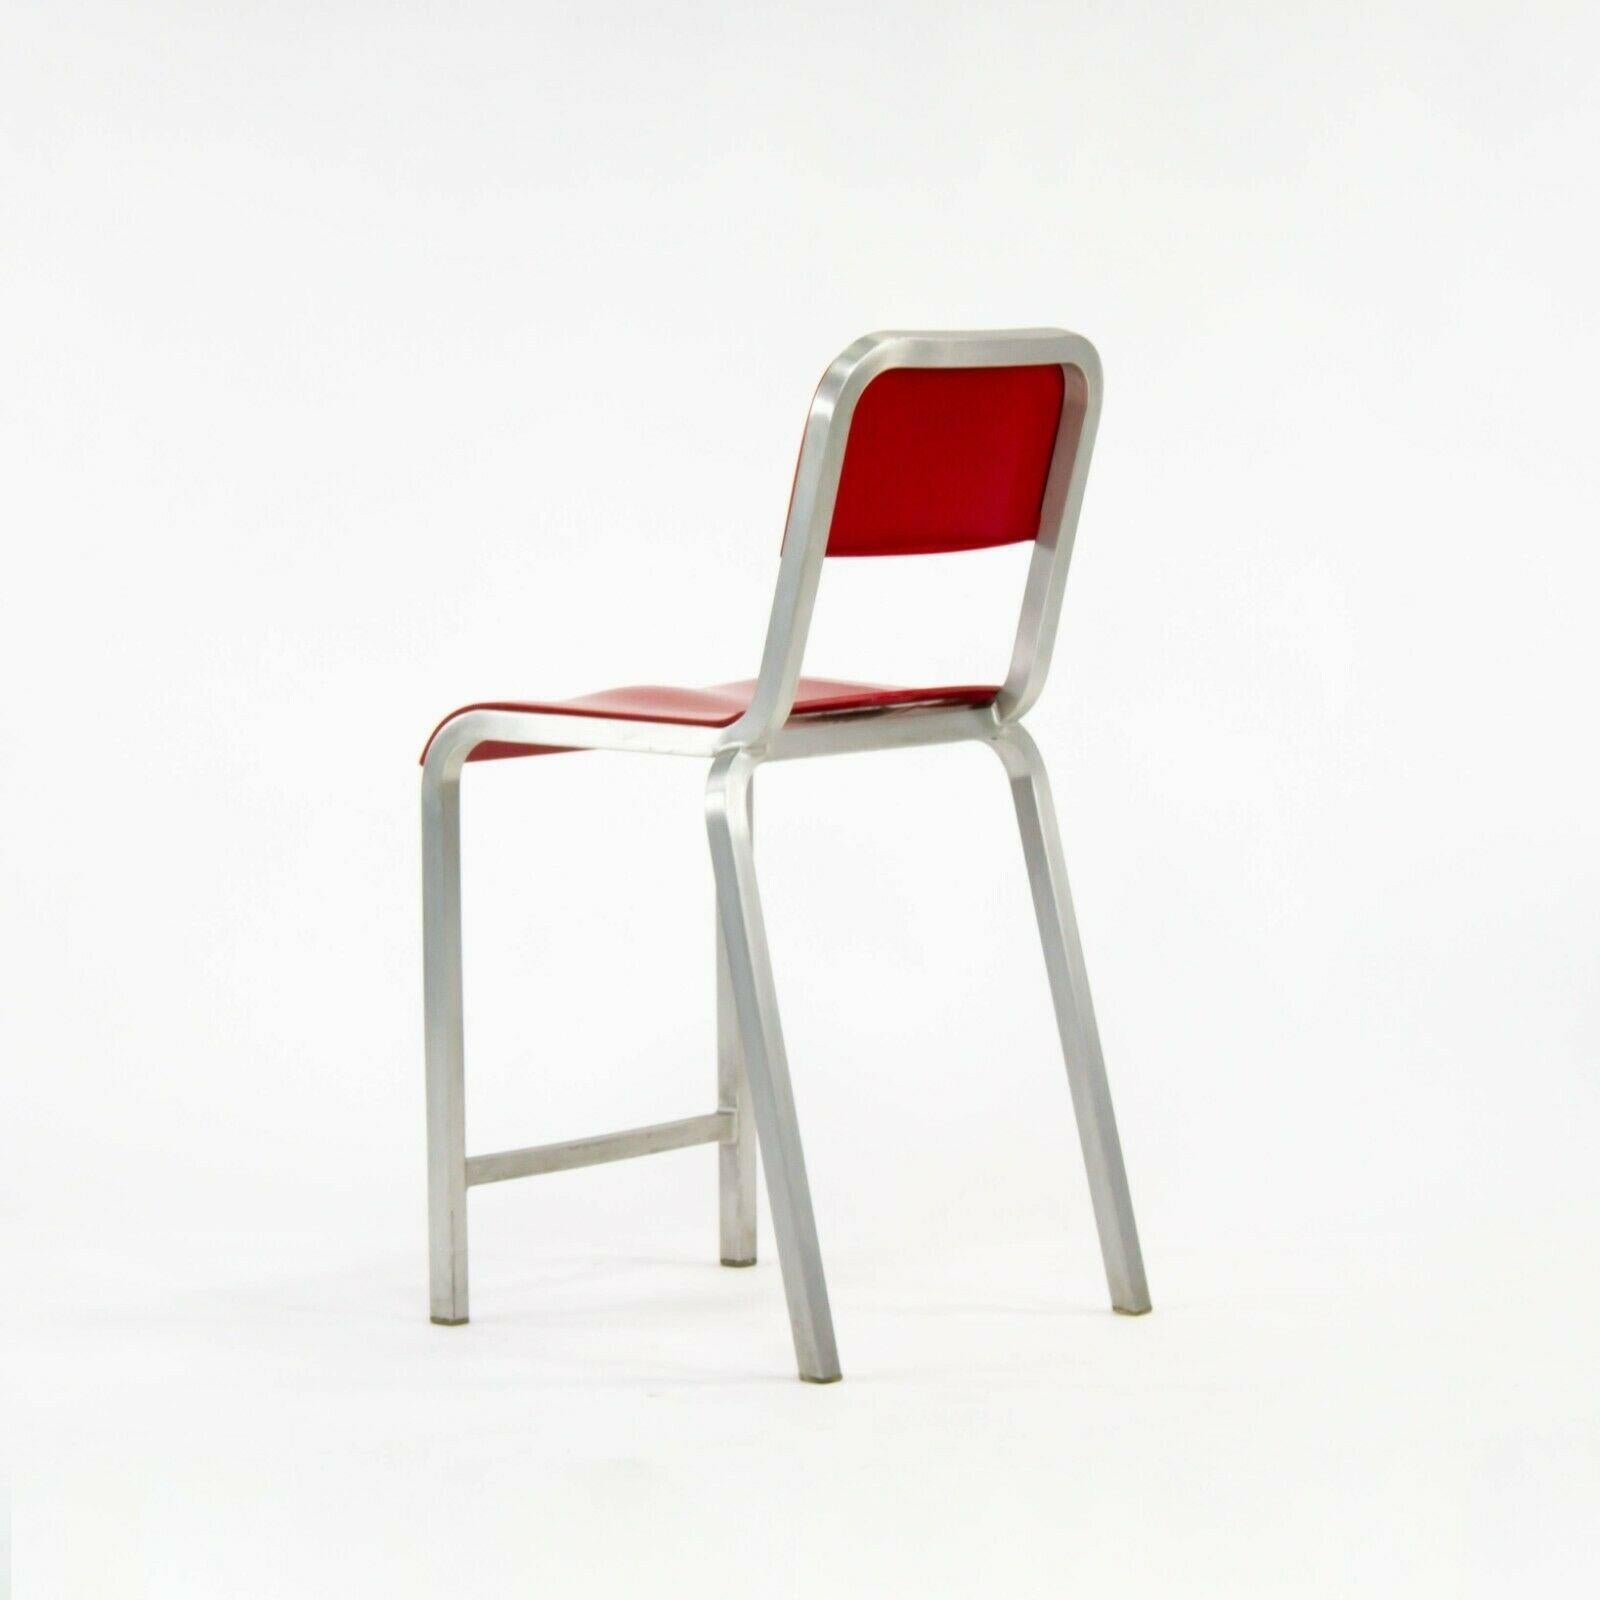 Aluminum 2010s Emeco 1951 Red Counter Stool by Adrian van Hooydonk and BMW Designworks For Sale